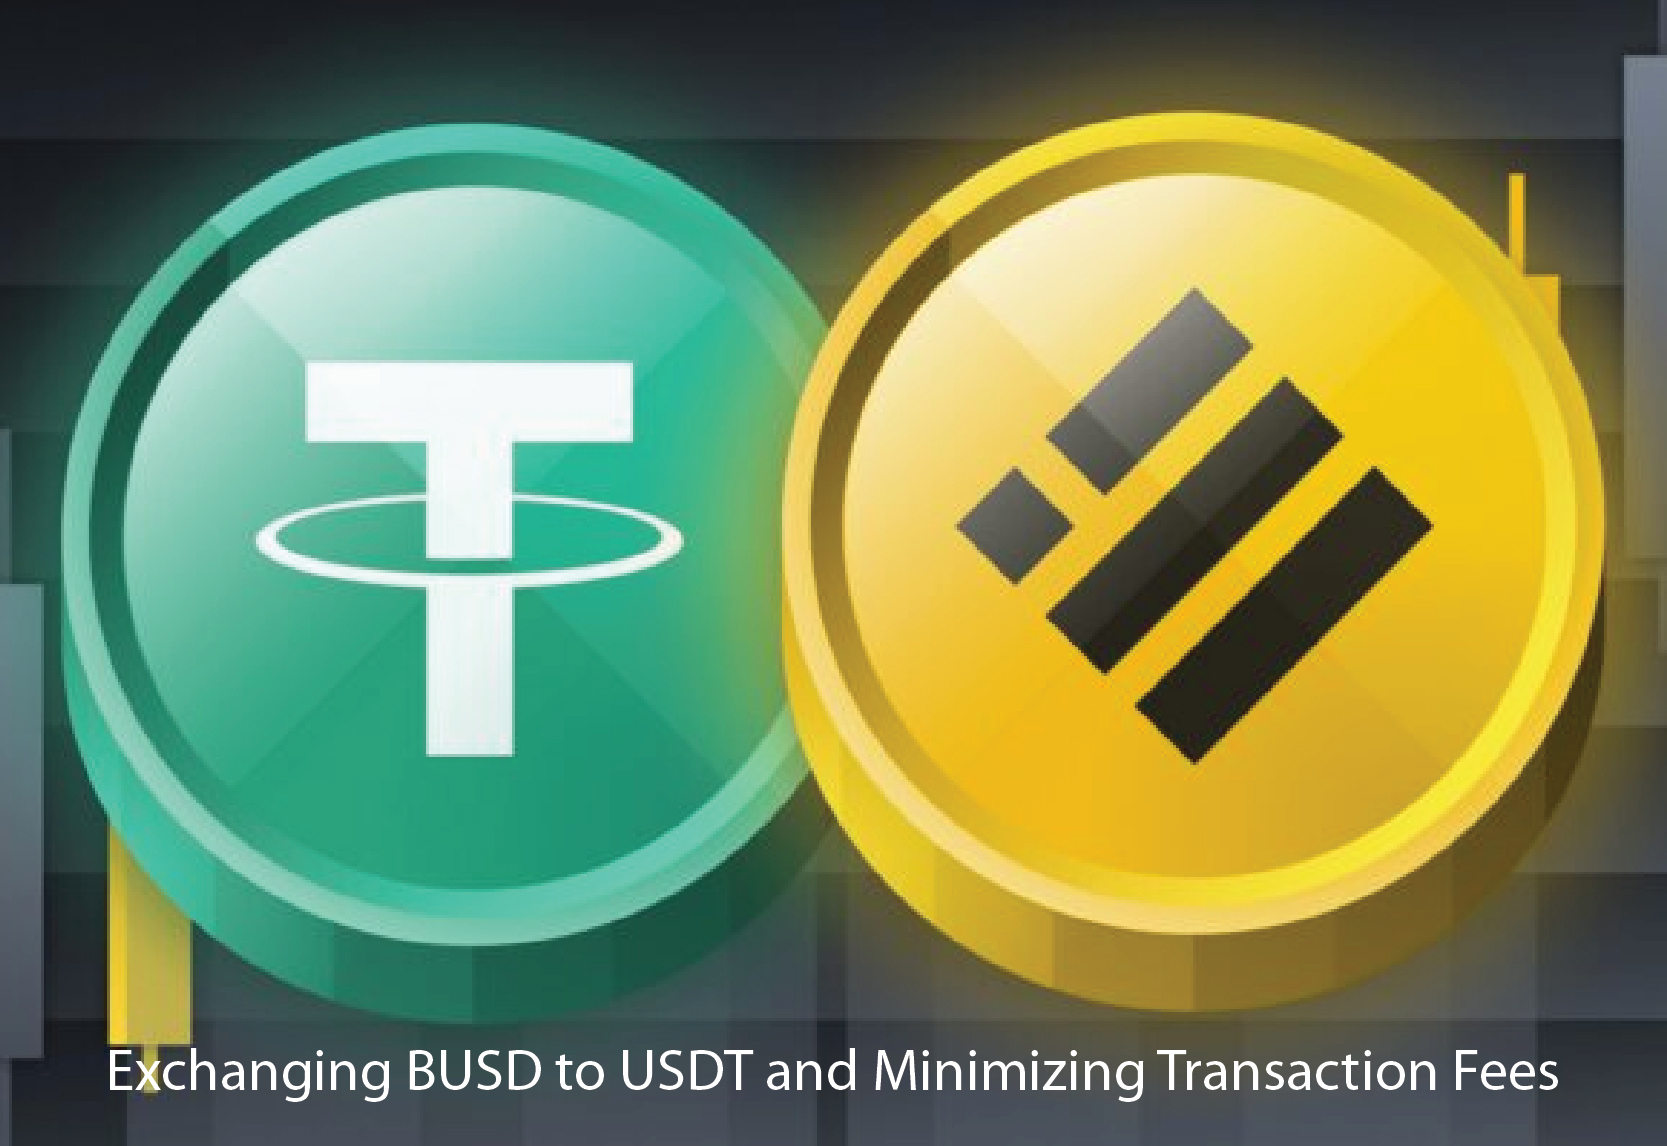 Exchanging BUSD to USDT